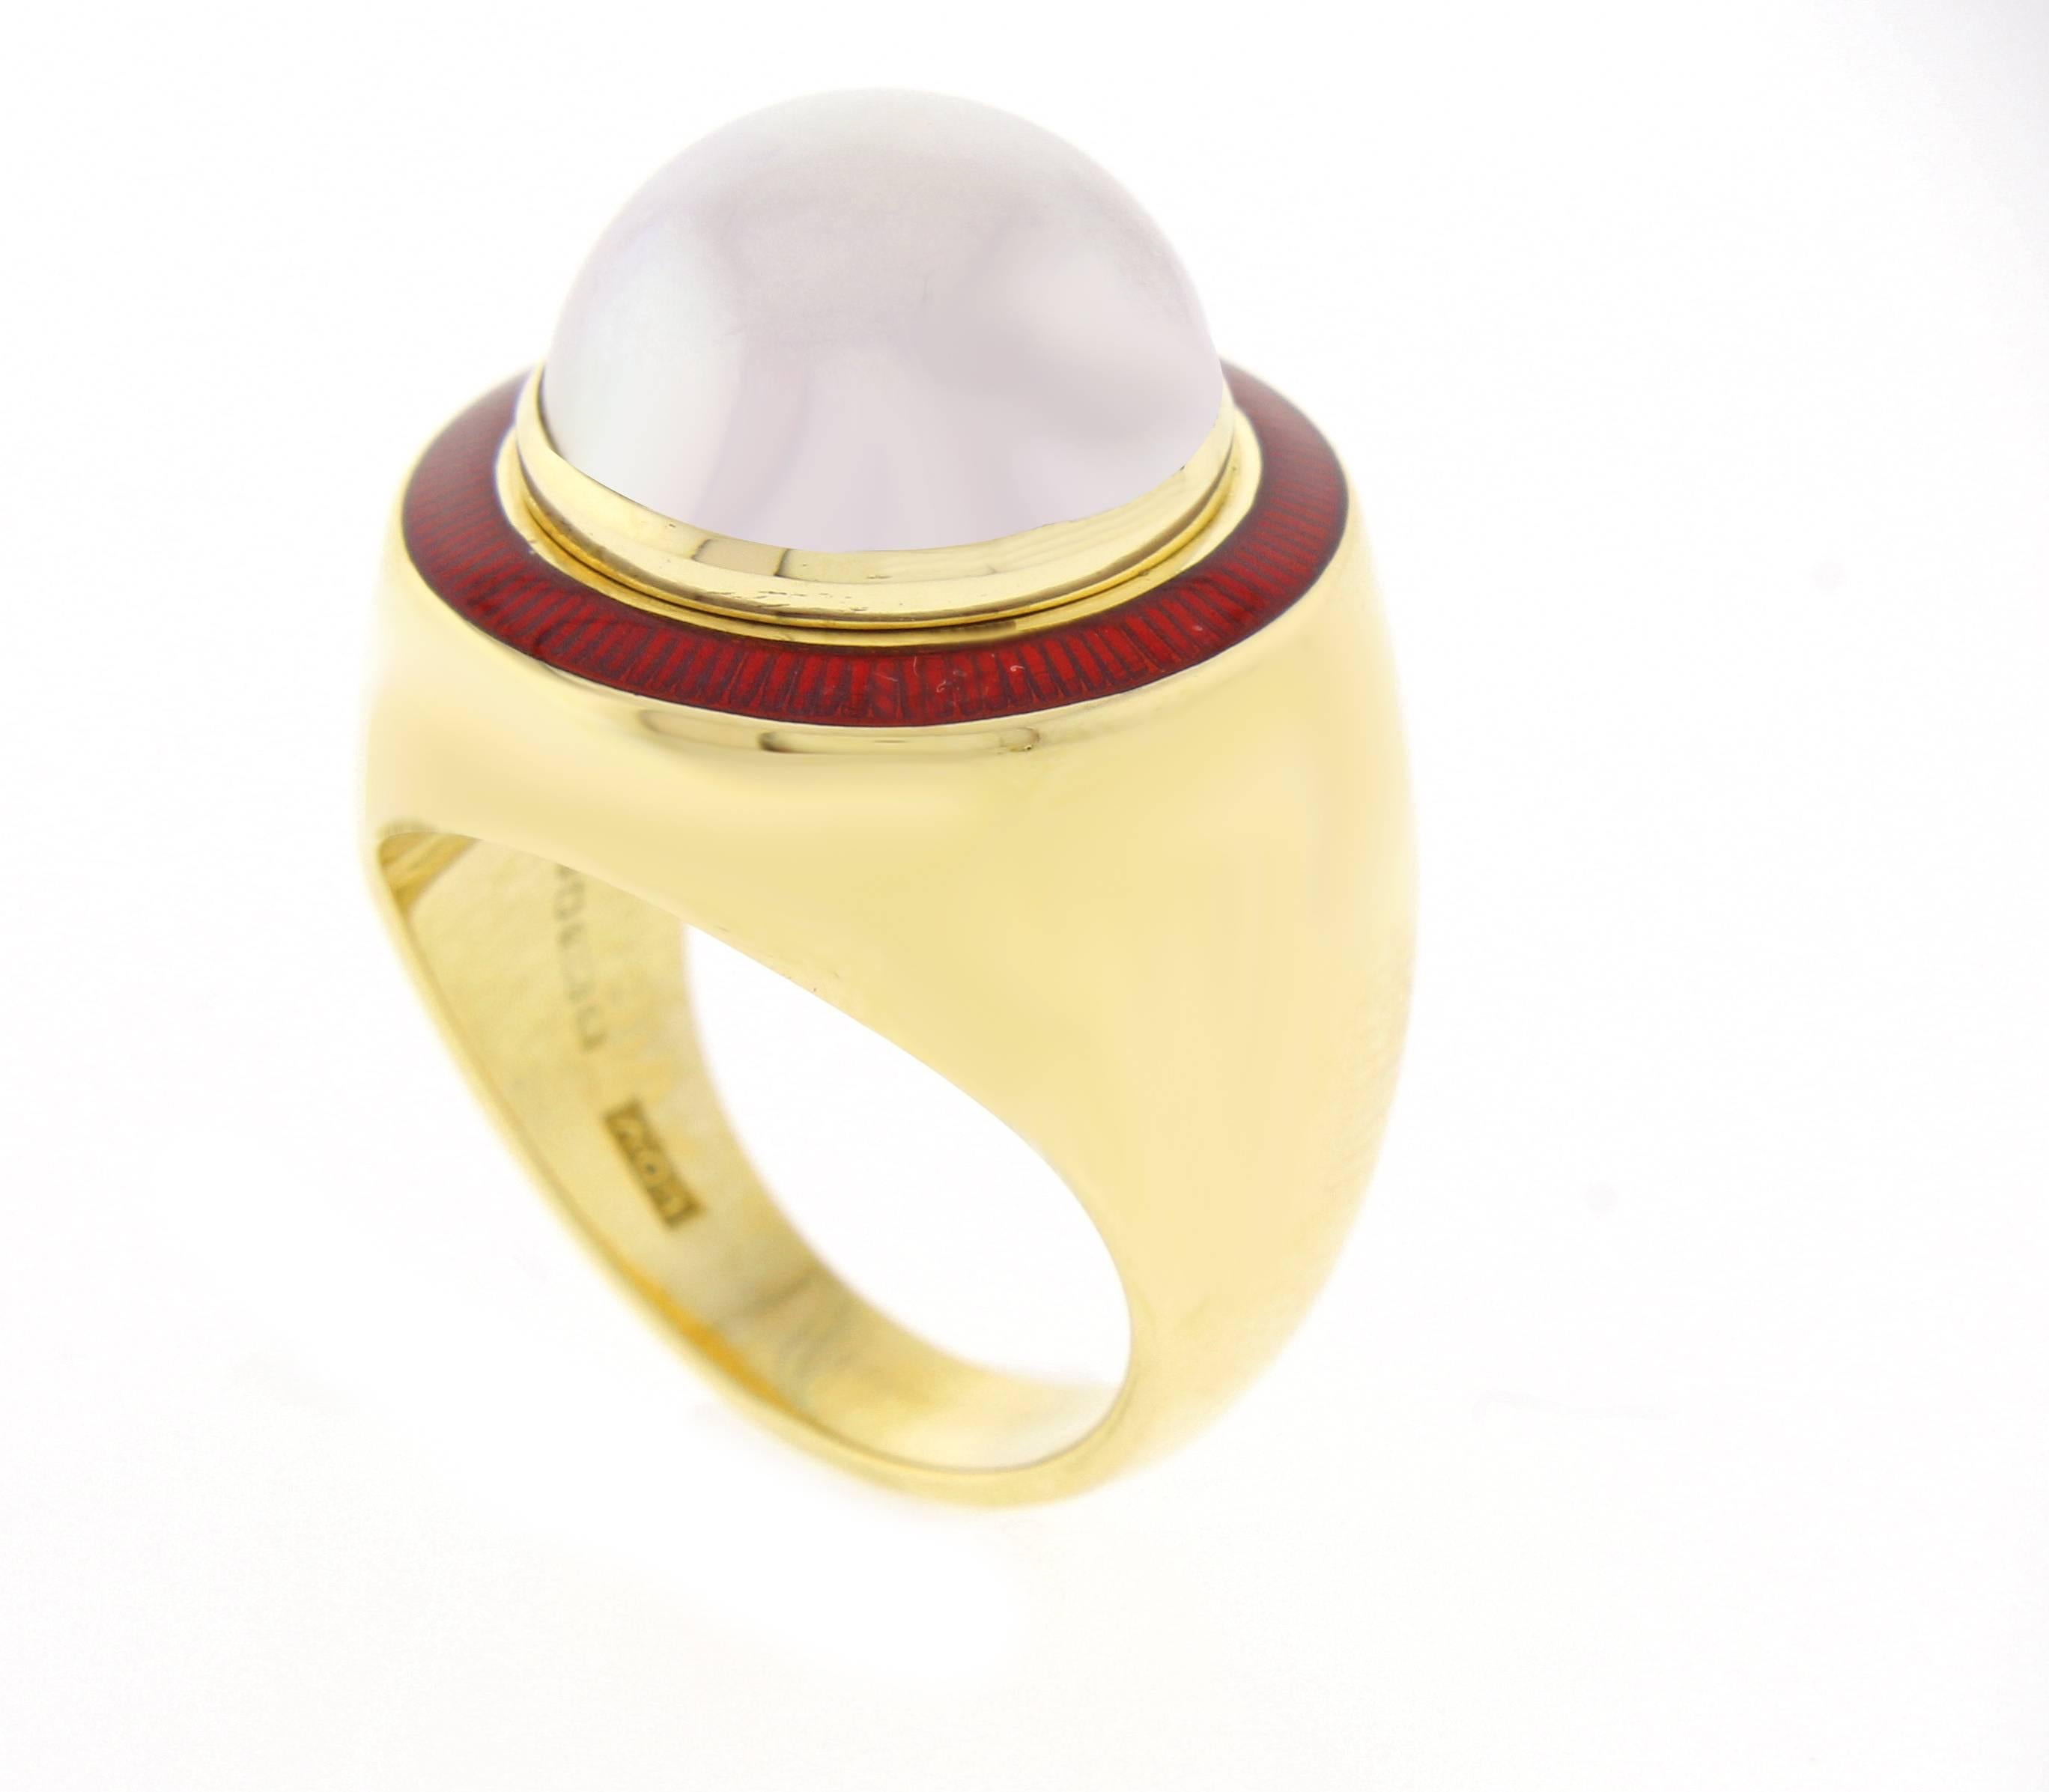 Leo De Vroomen is world renowned for his vividly colored enameling and stunning designs. This ring features a 15mm mabé pear  framed by French red enamel. The 18 karat gold ring bears the official assay mark of London.  Size 7